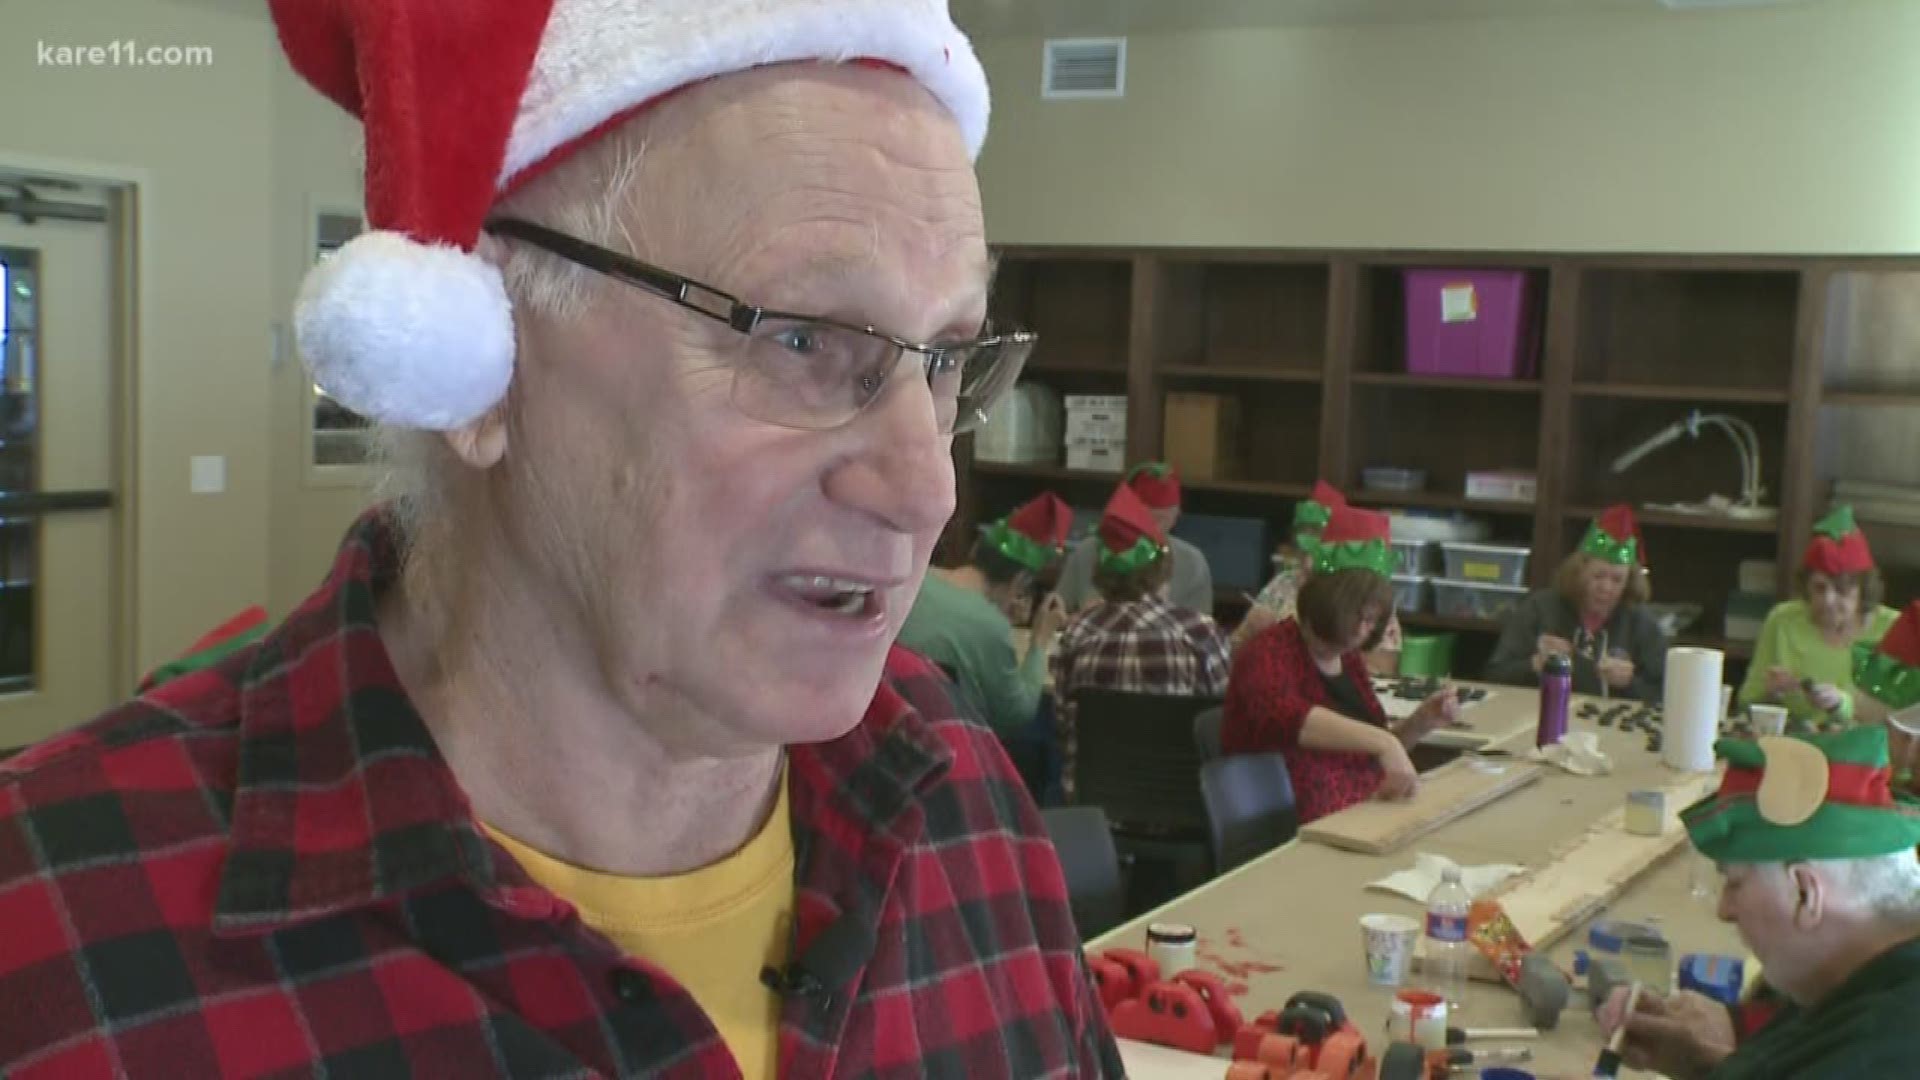 A shout out for a group of seniors who are building memories by building toys. This labor of love all starts with one man with a workshop in Eagan. Adrienne Broaddus finds out it's his way of bringing joy into the world.